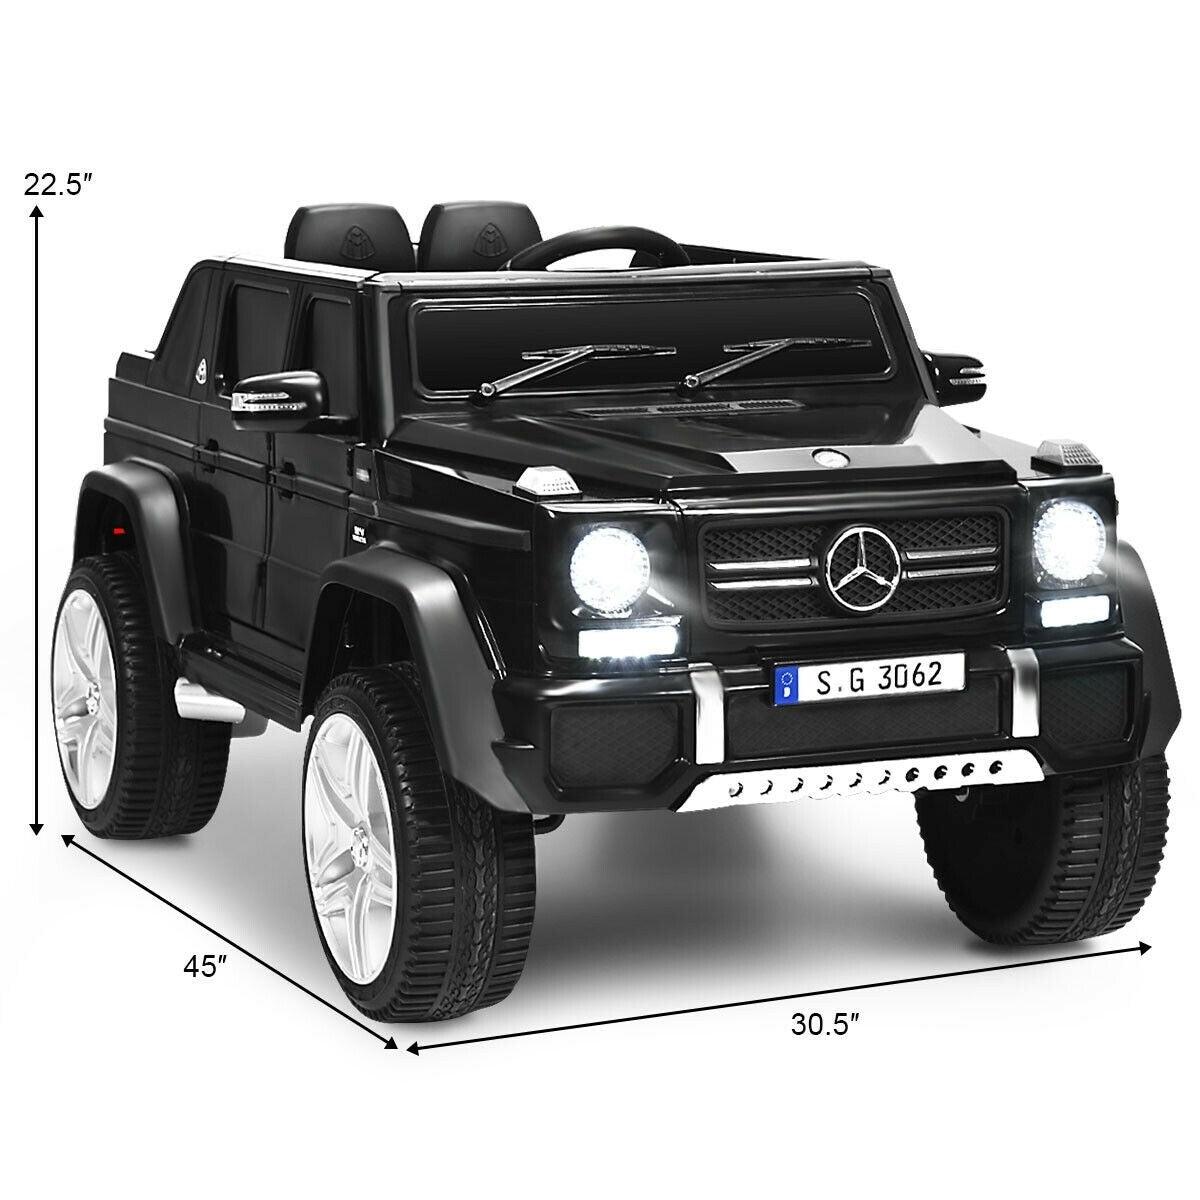 Mercedes-Benz Ride-On Car TY328021WHA for Kids,12V Licensed - YOURISHOP.COM